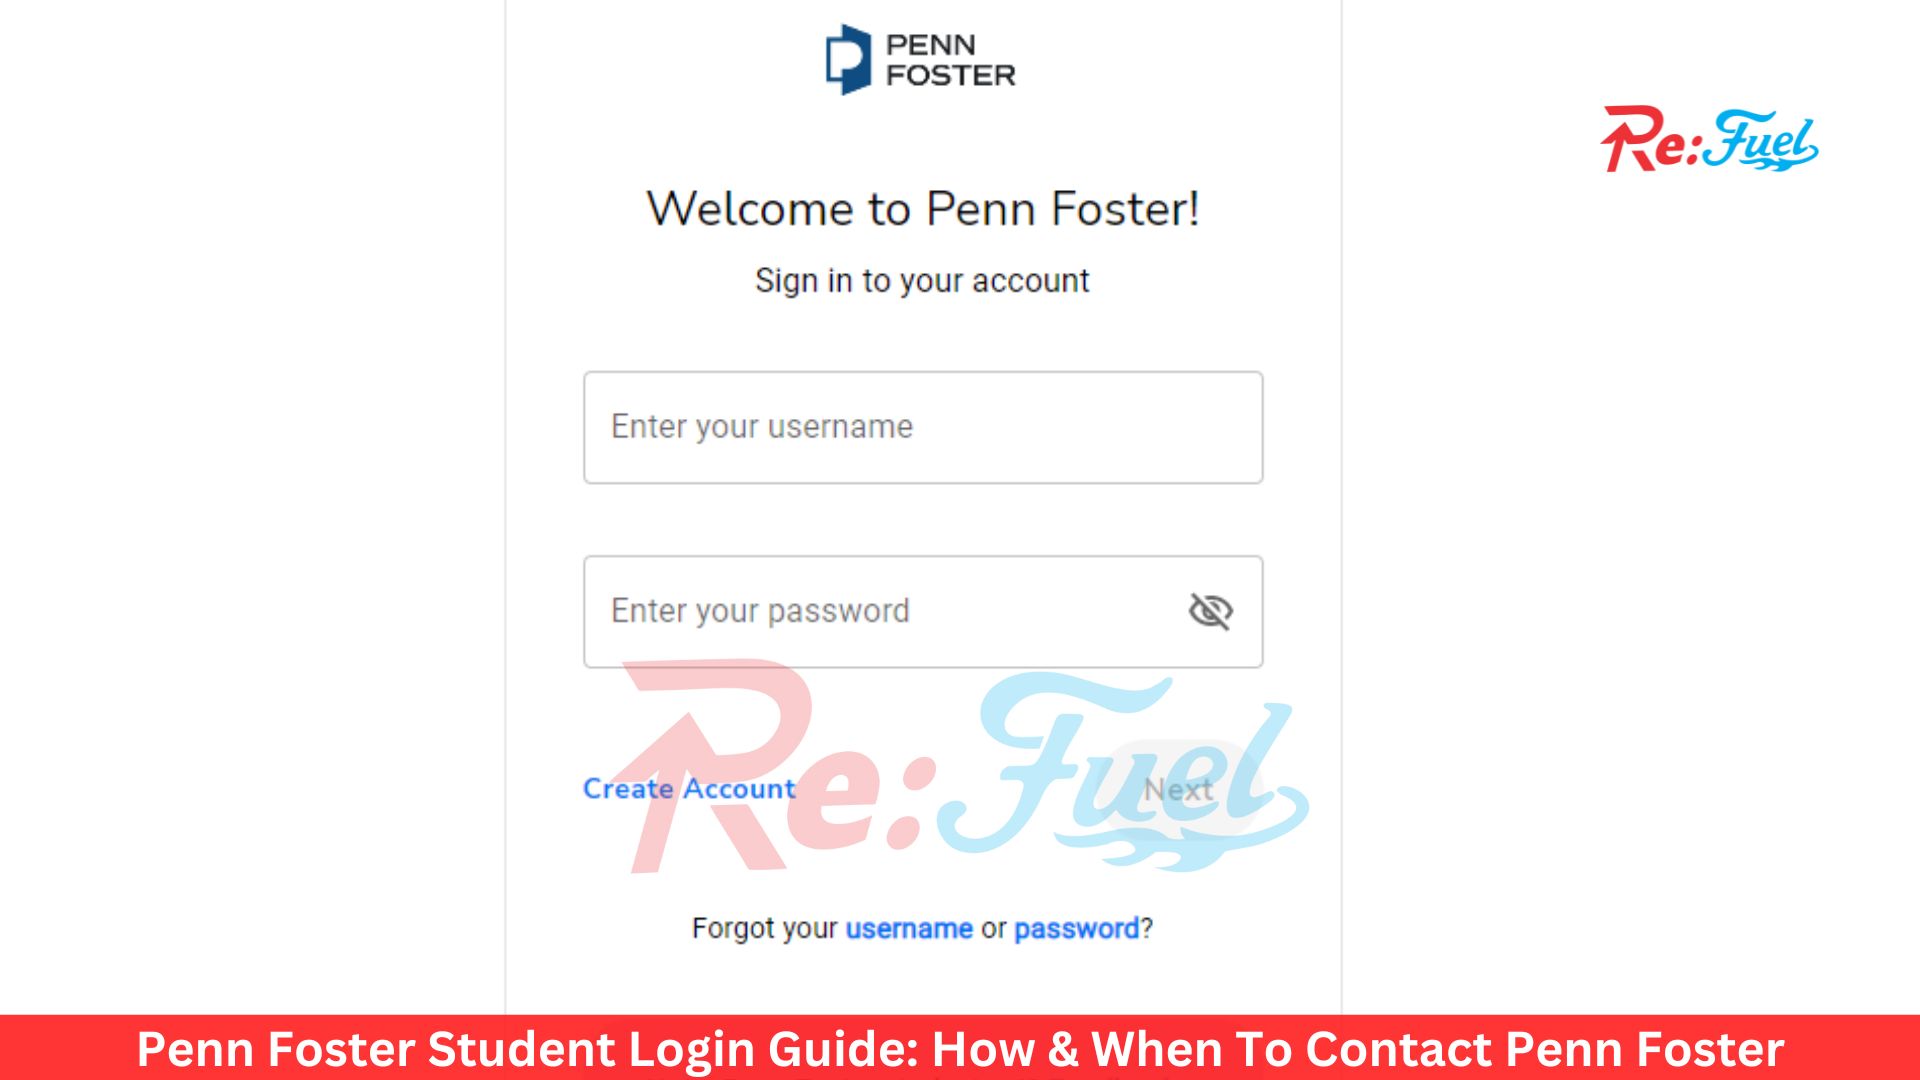 Penn Foster Student Login Guide: How & When To Contact Penn Foster